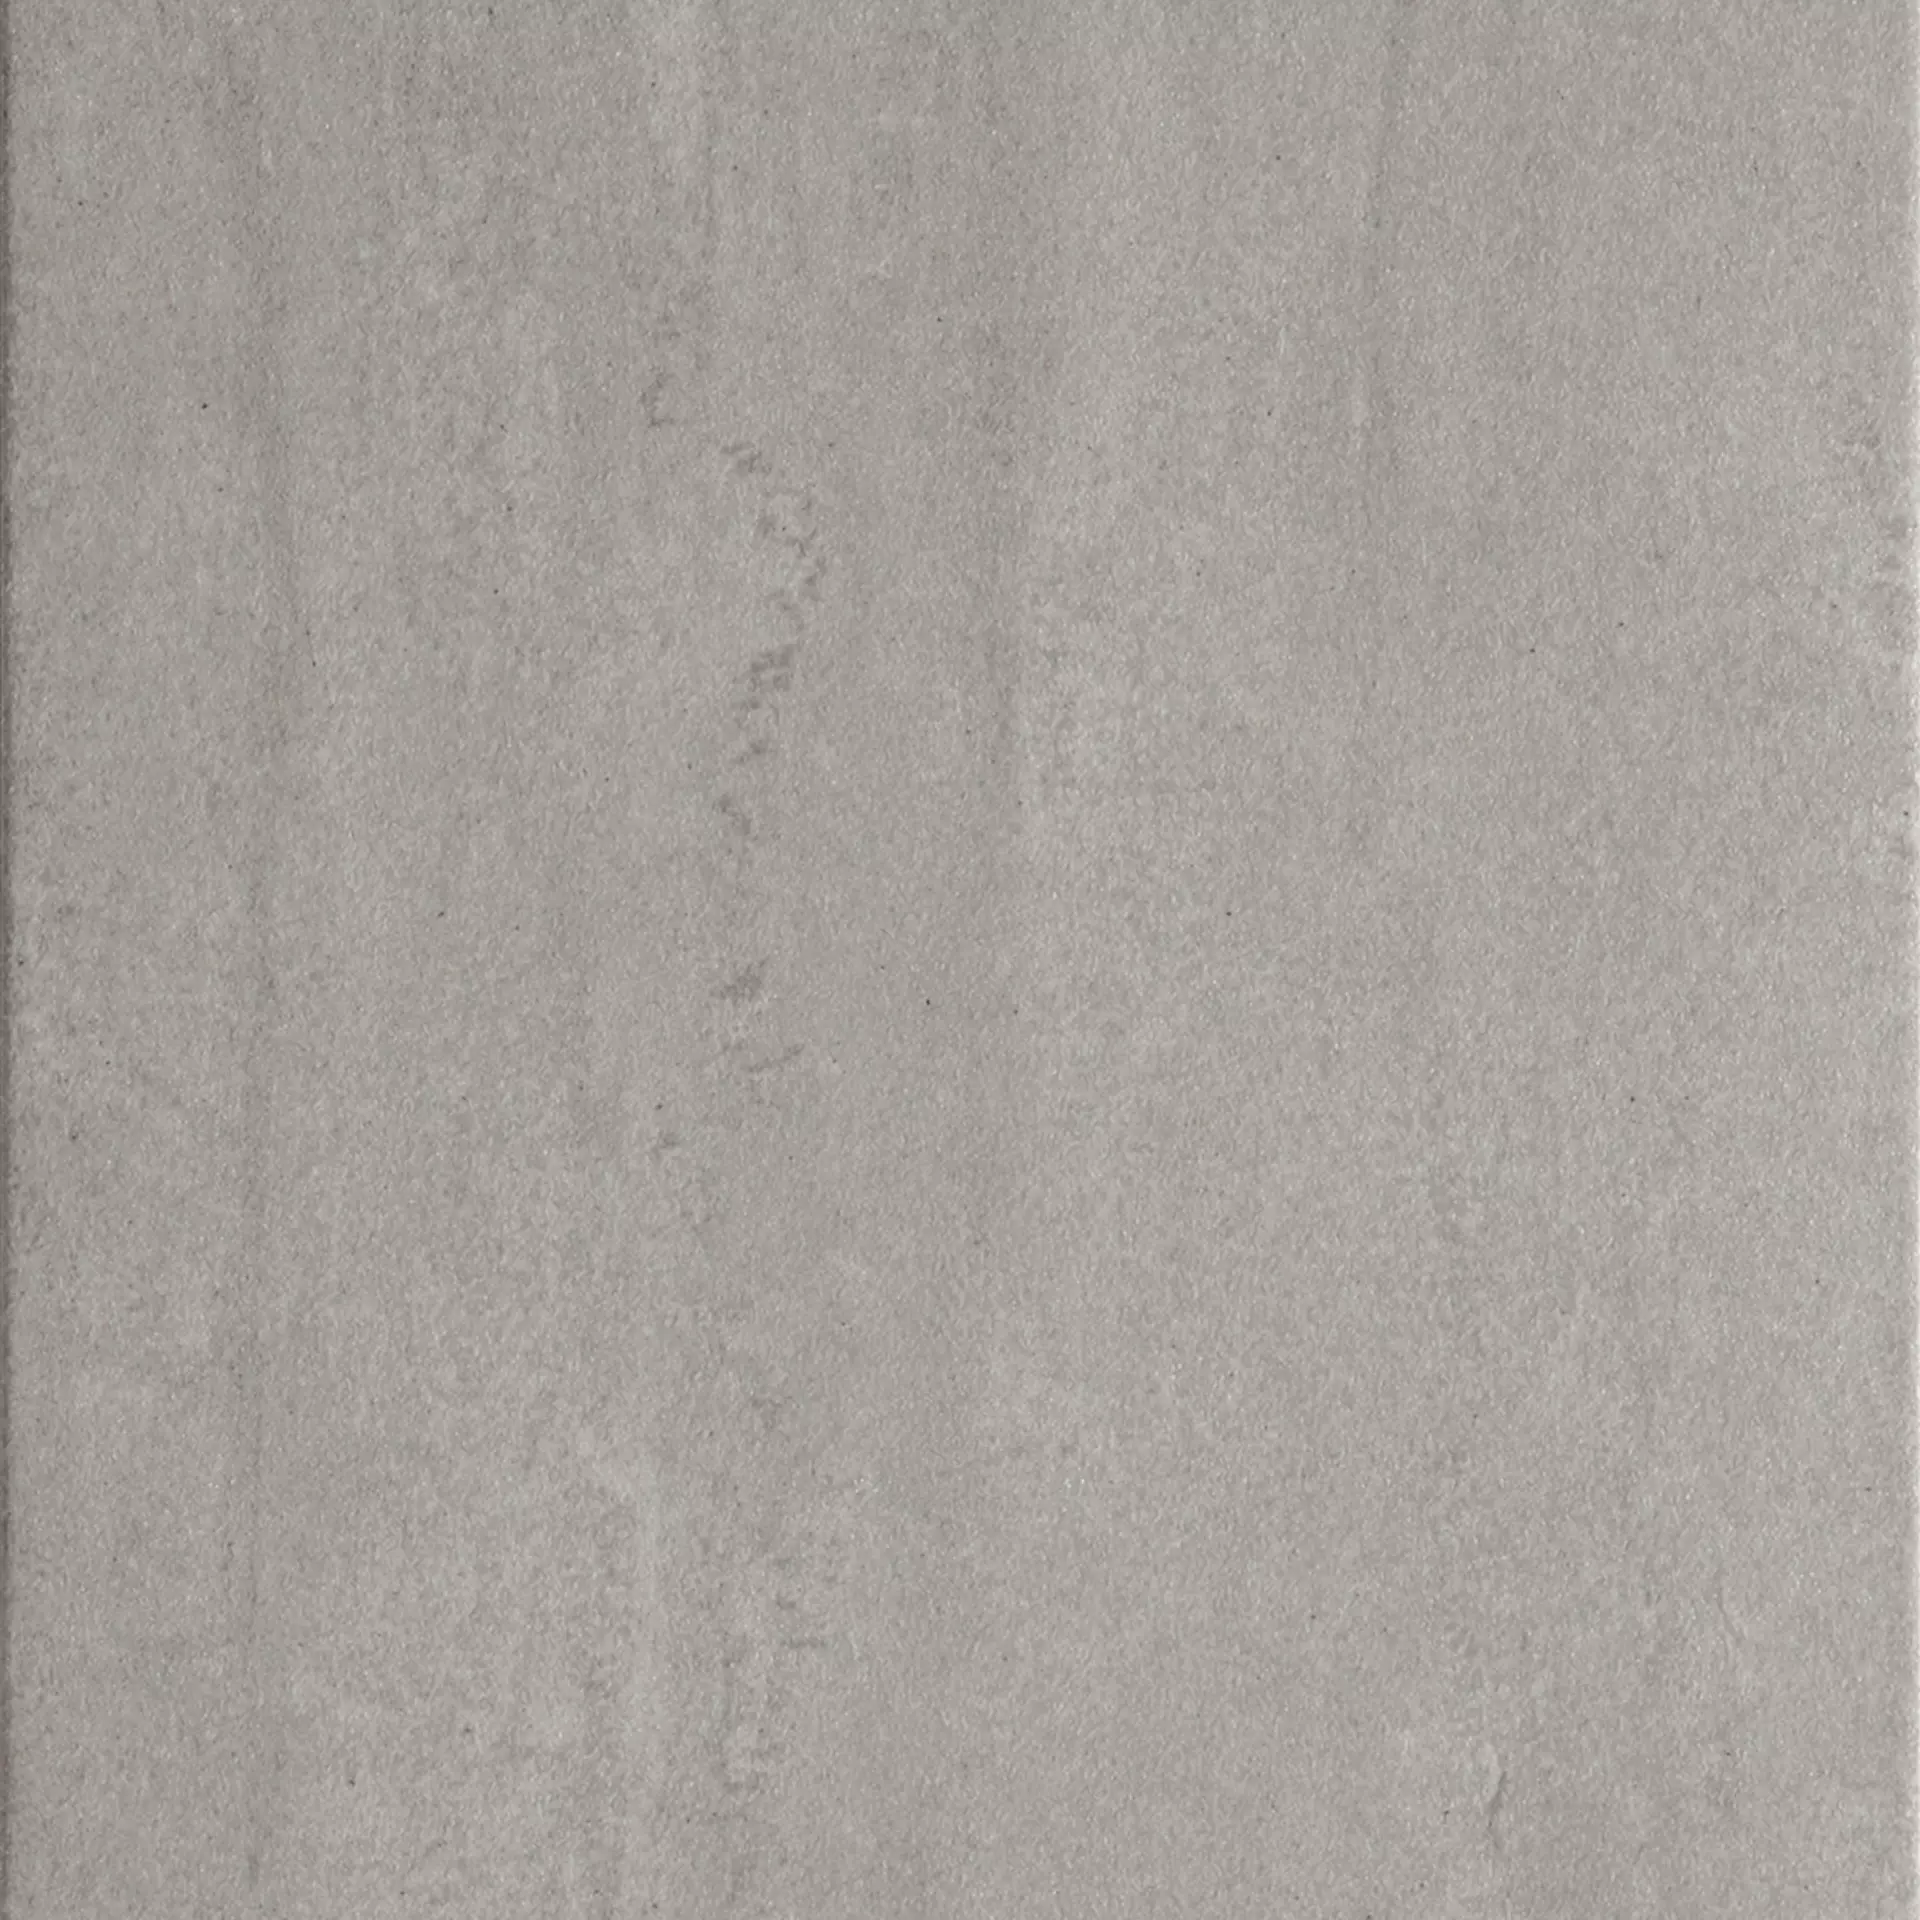 Rondine Contract Silver Naturale J84030 60,5x60,5cm 8,5mm